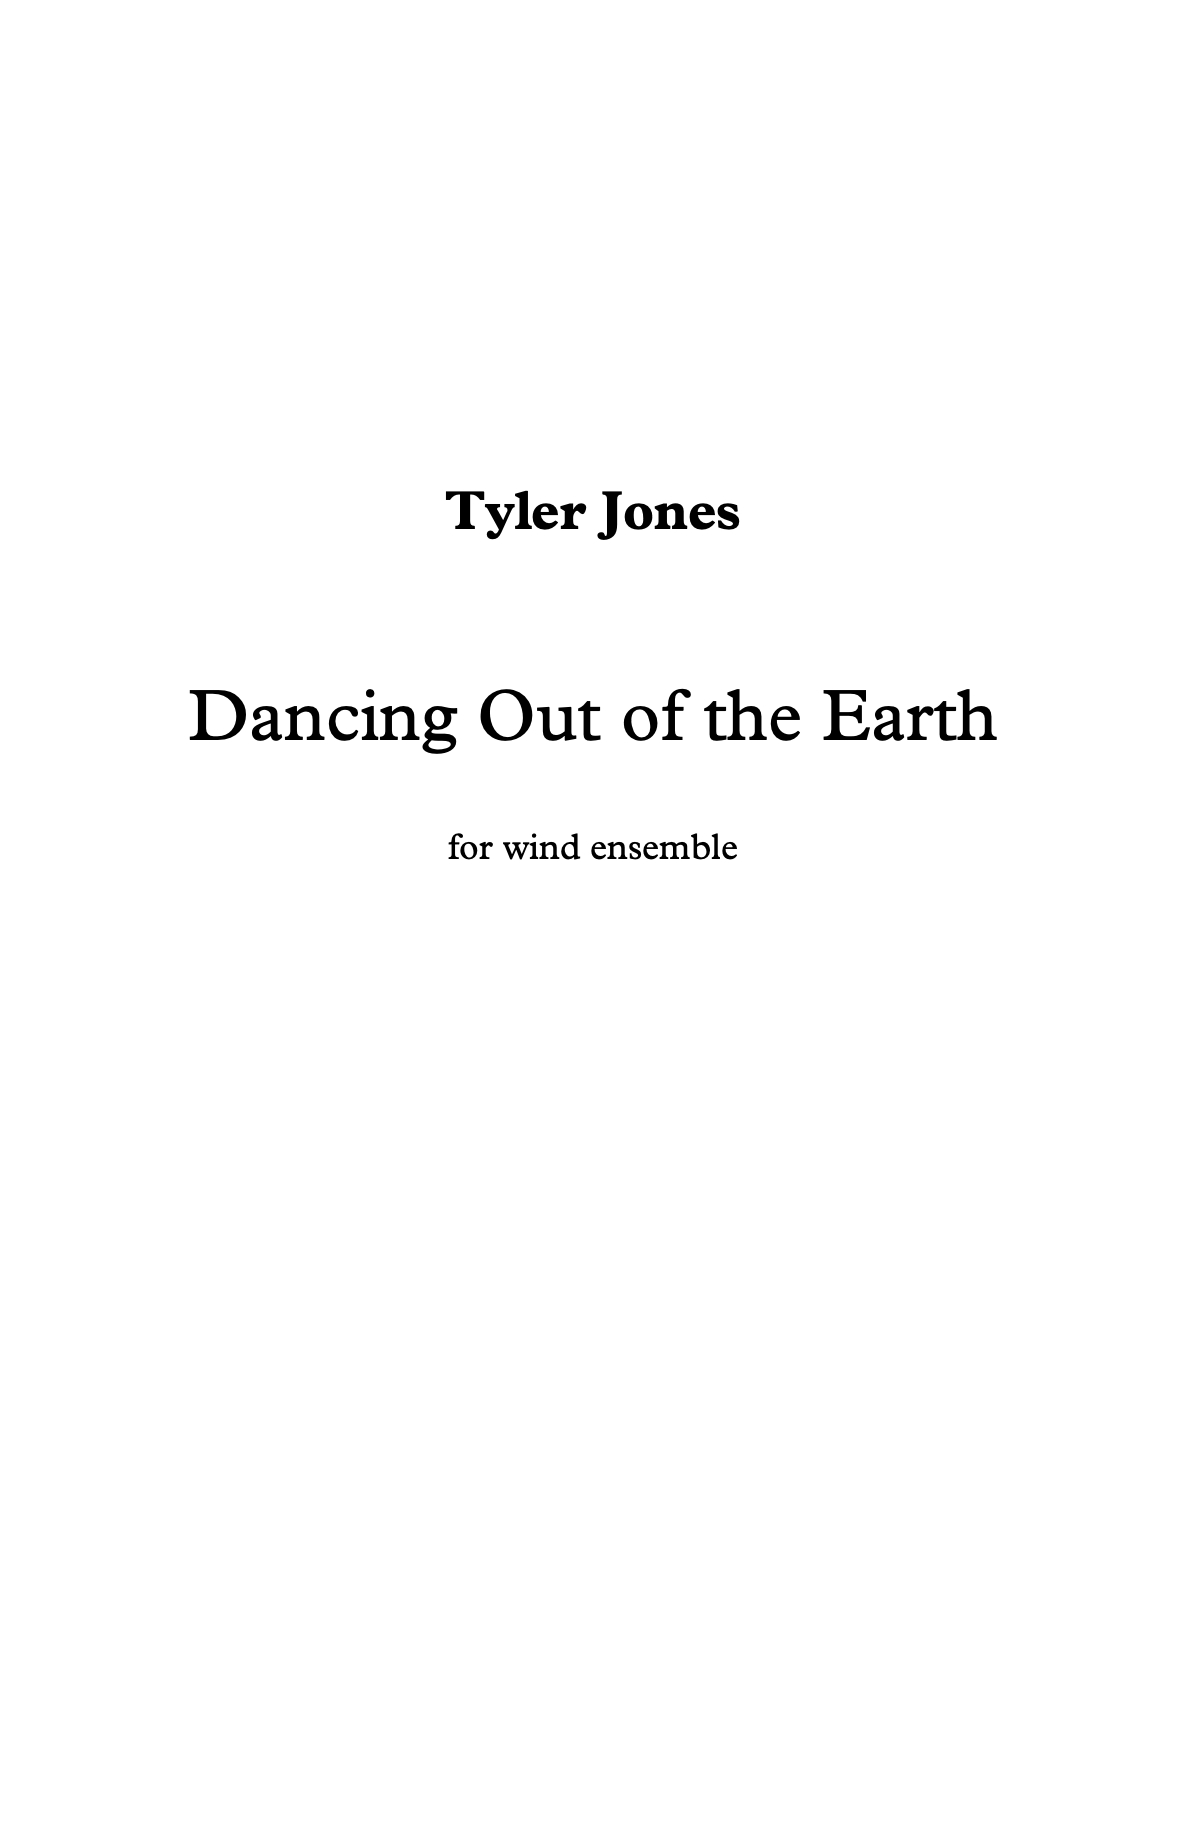 Dancing Out Of The Earth by Tyler Jones